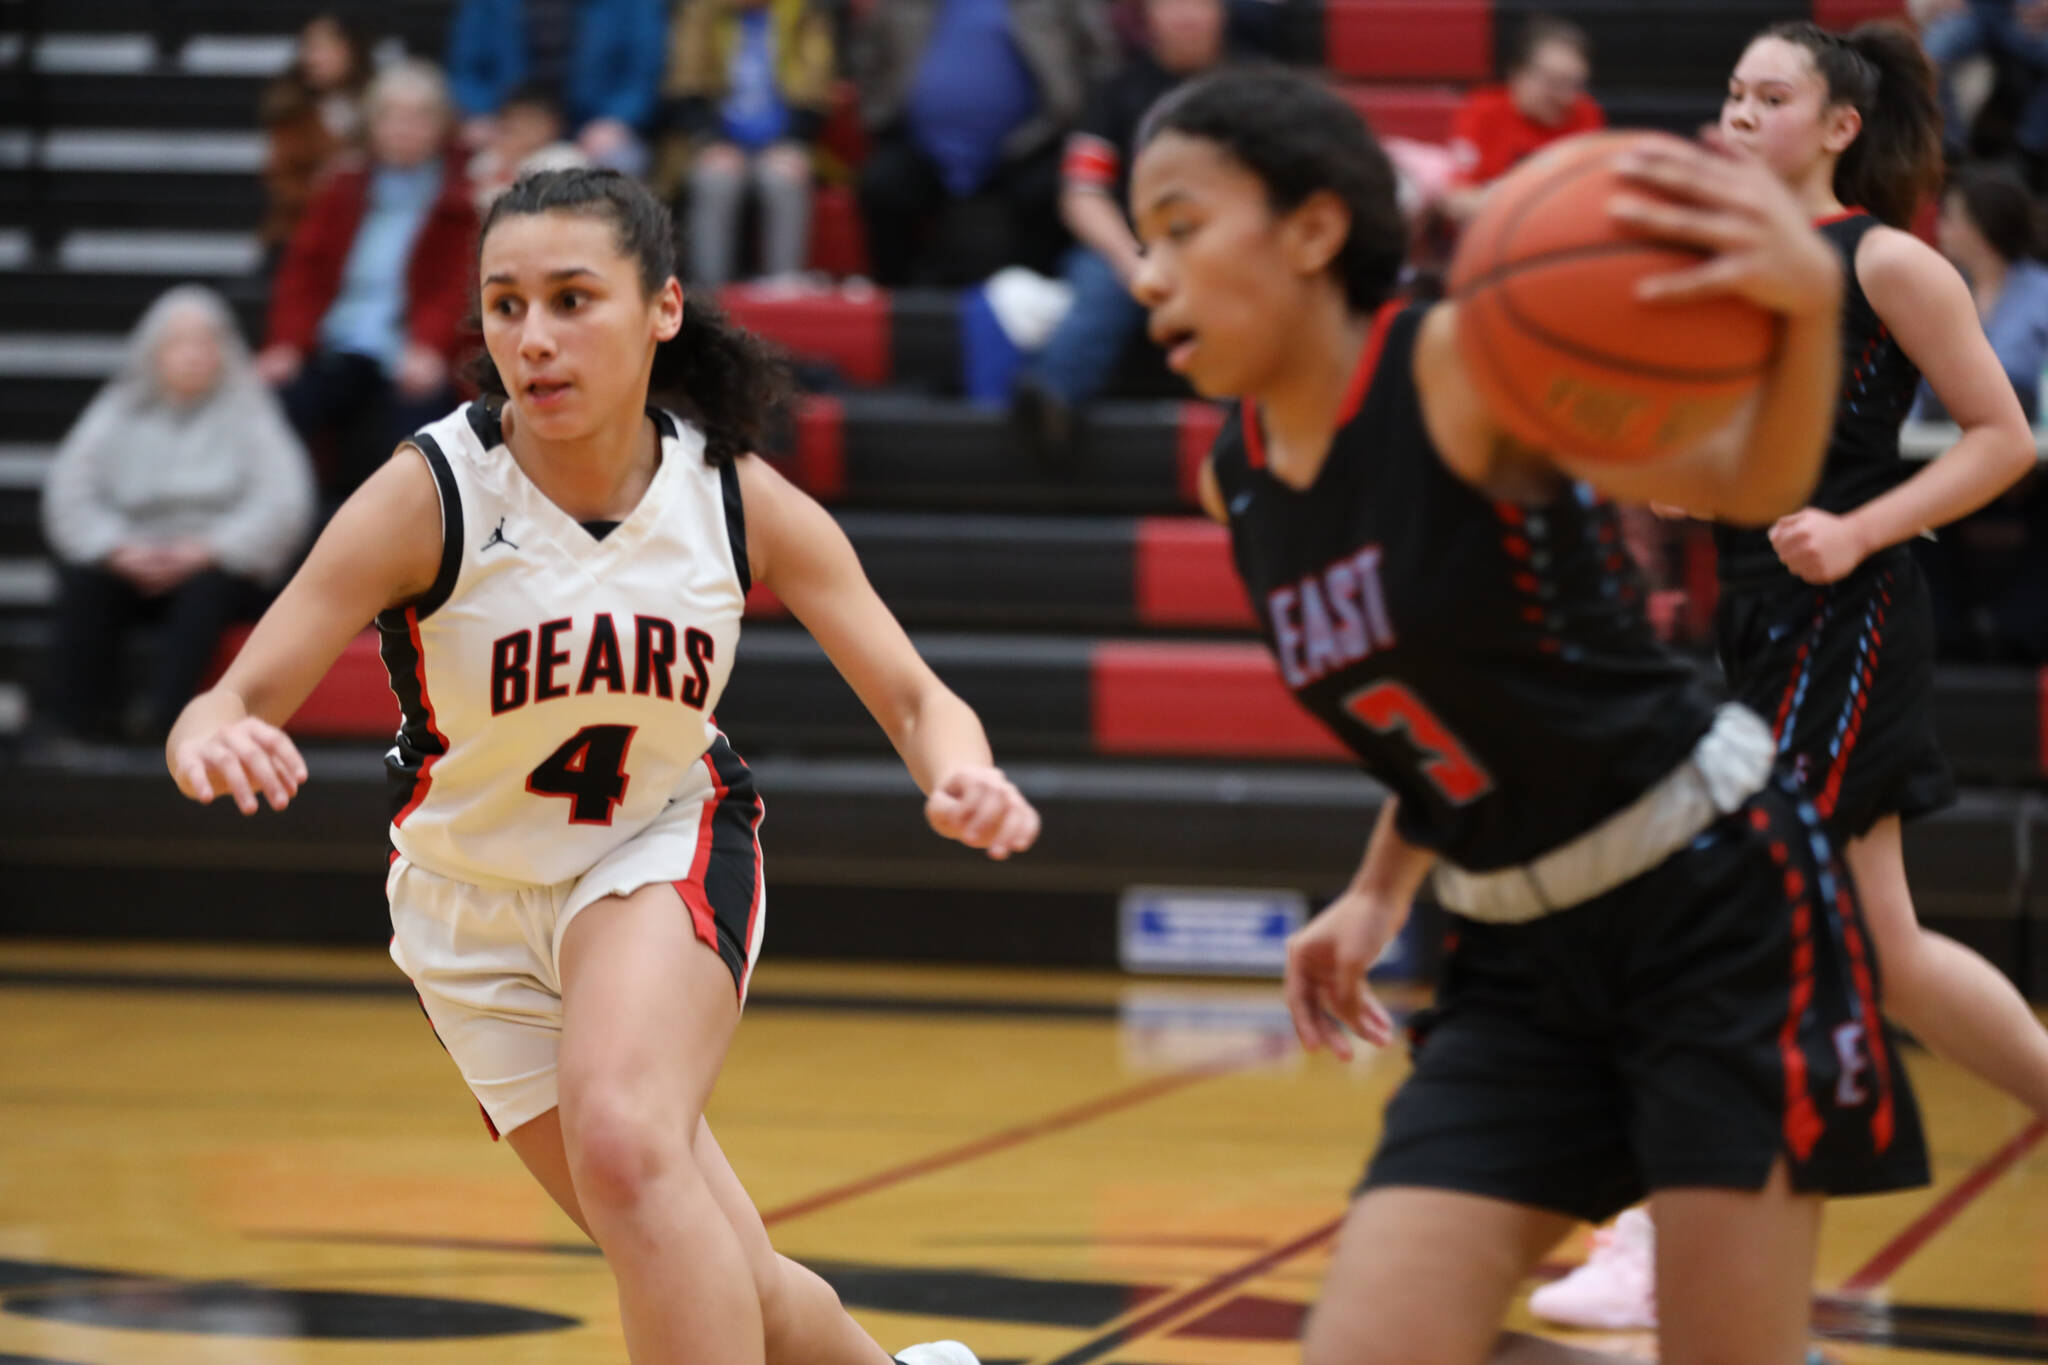 Senior guard Kiyara Miller runs down the court during Wednesday night’s game against Bettye Davis East Anchorage High School during the first night of the Princess Cruises Capital City Classic. (Clarise Larson / Juneau Empire)